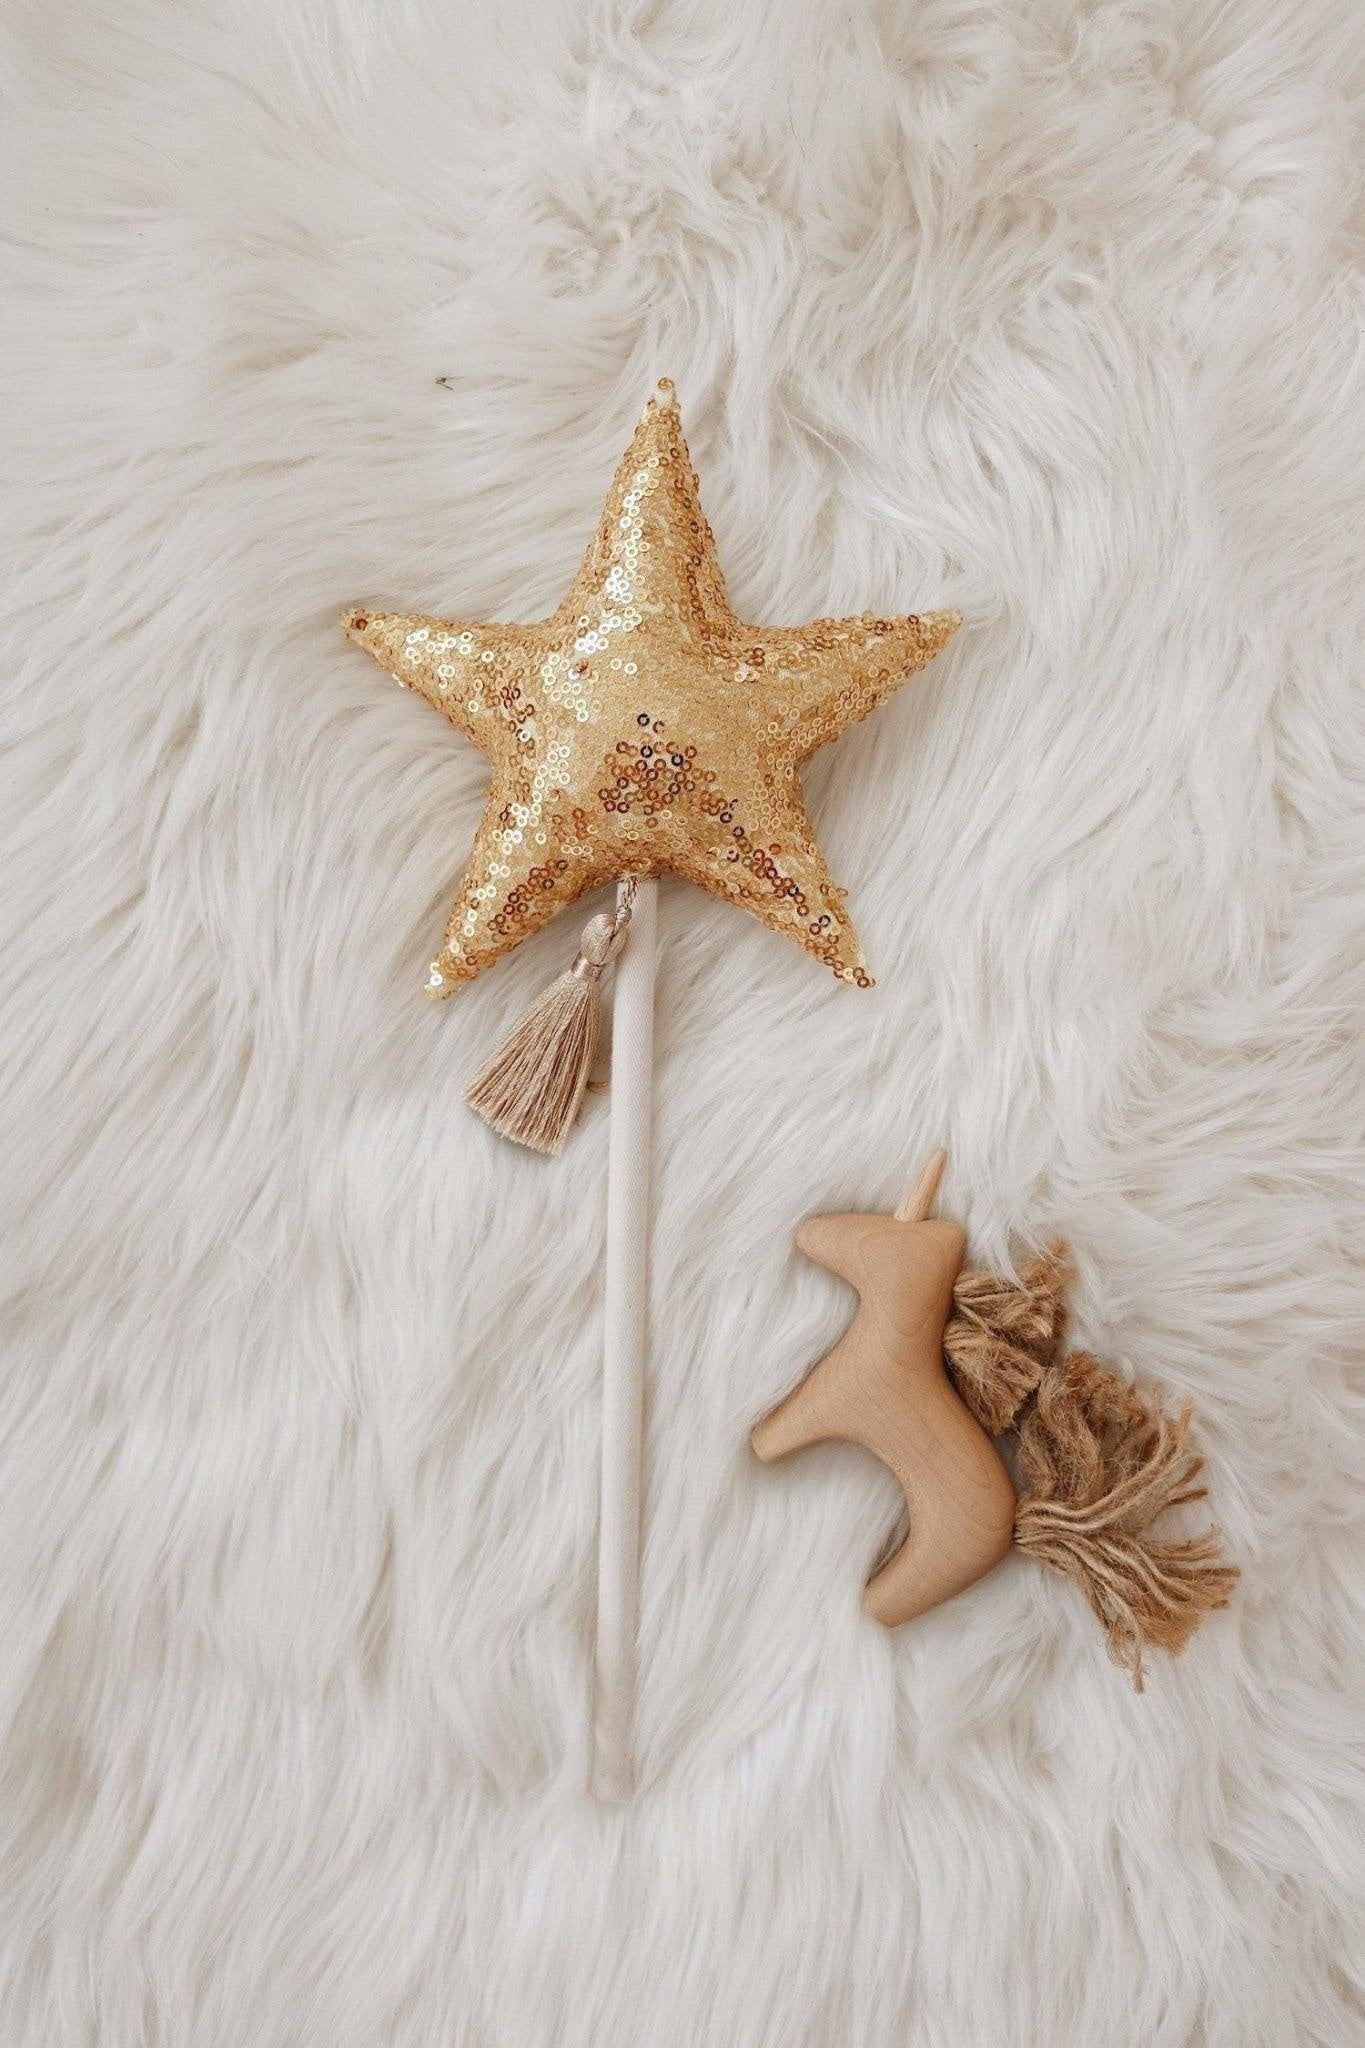 “Gold Sequins” Magic Wand by Moi Mili